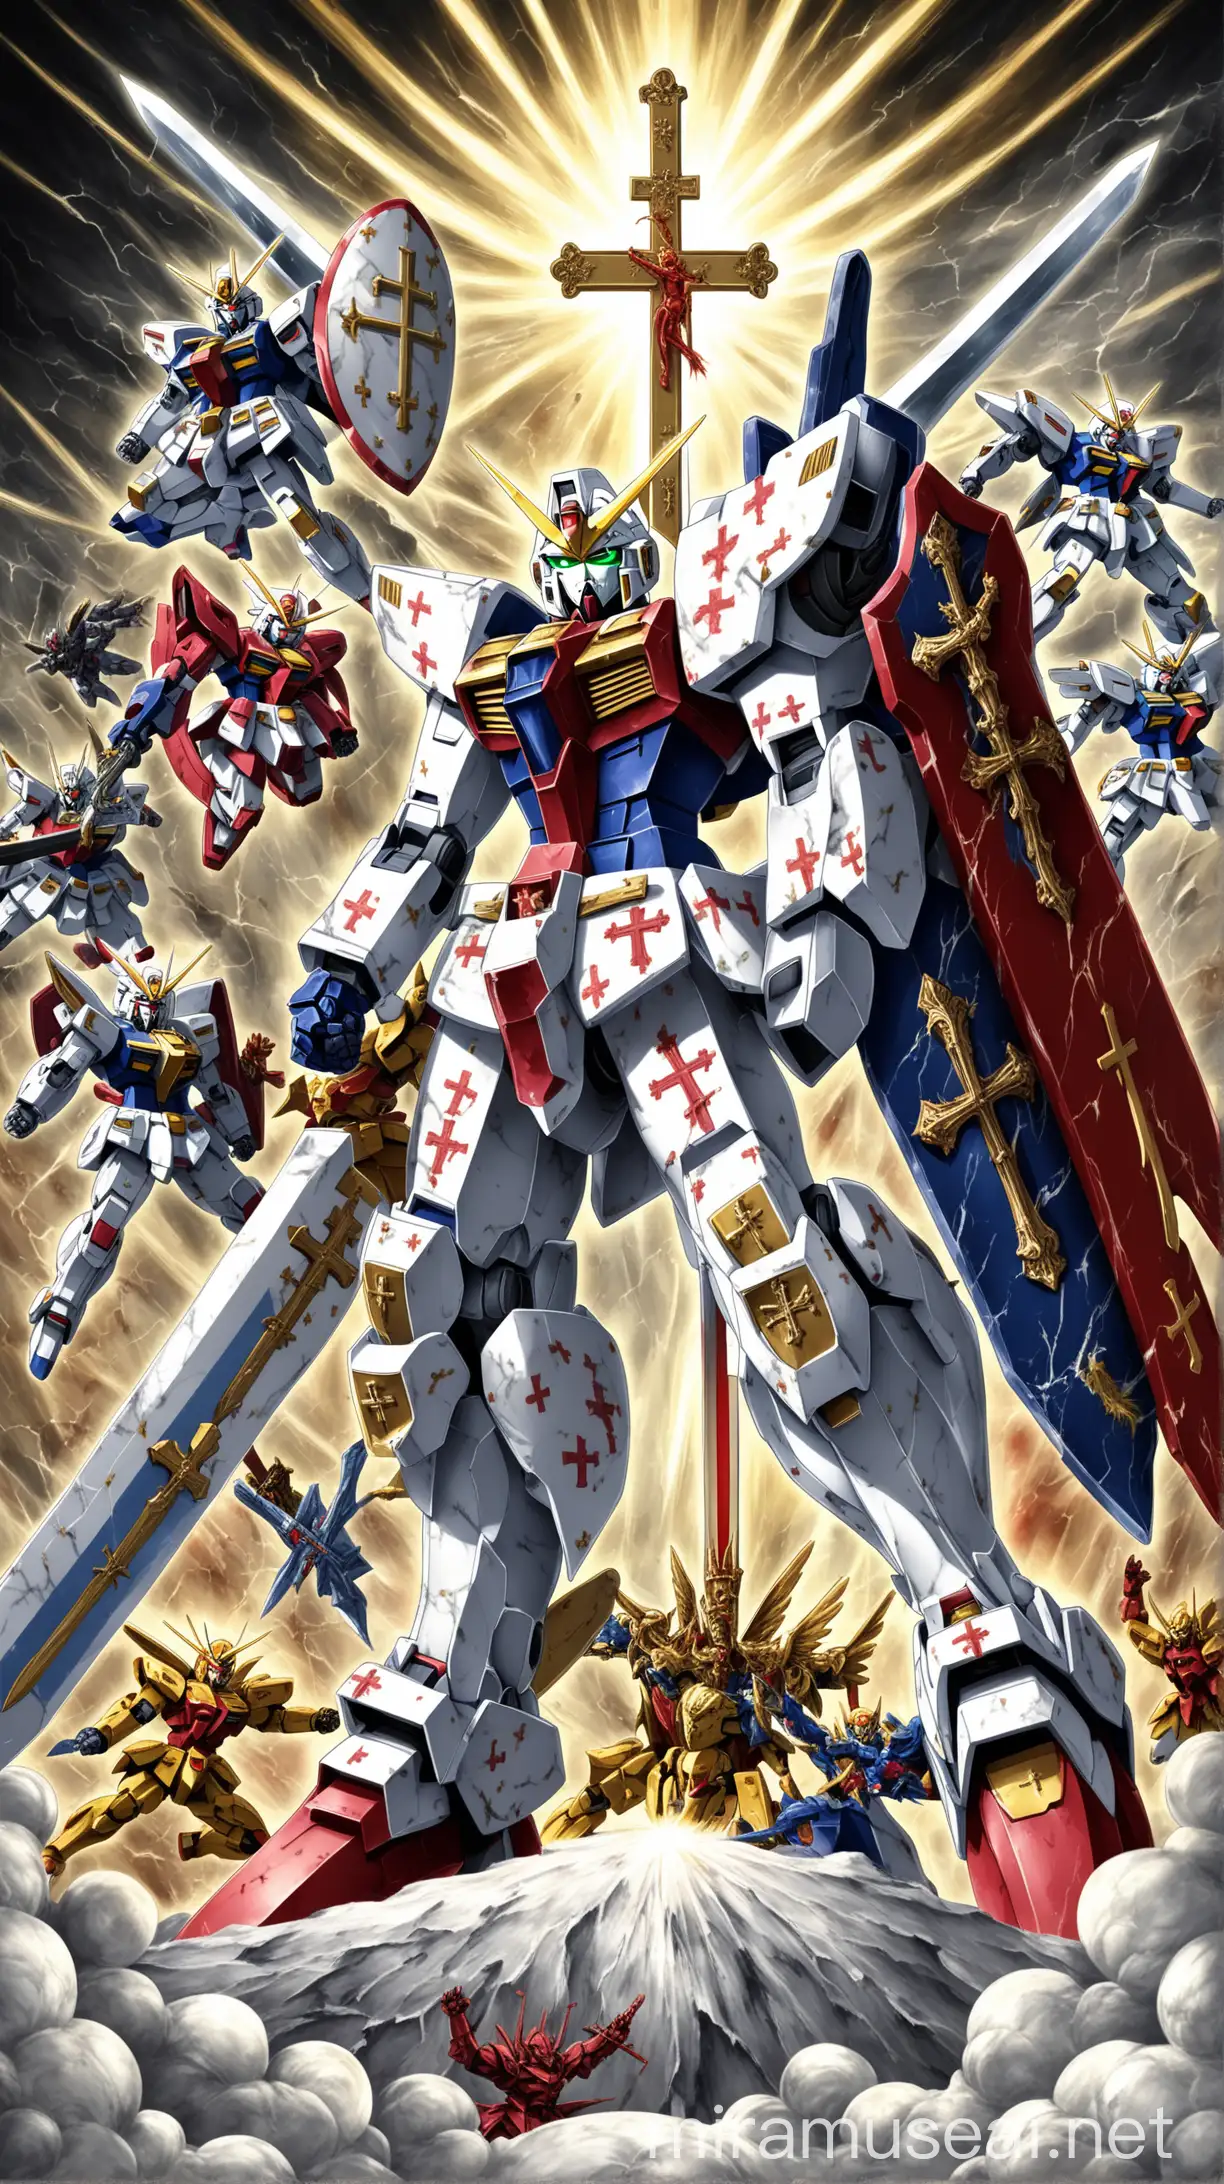 Catholic Marble Suit Gundam Battling Demons with Sword and Shield